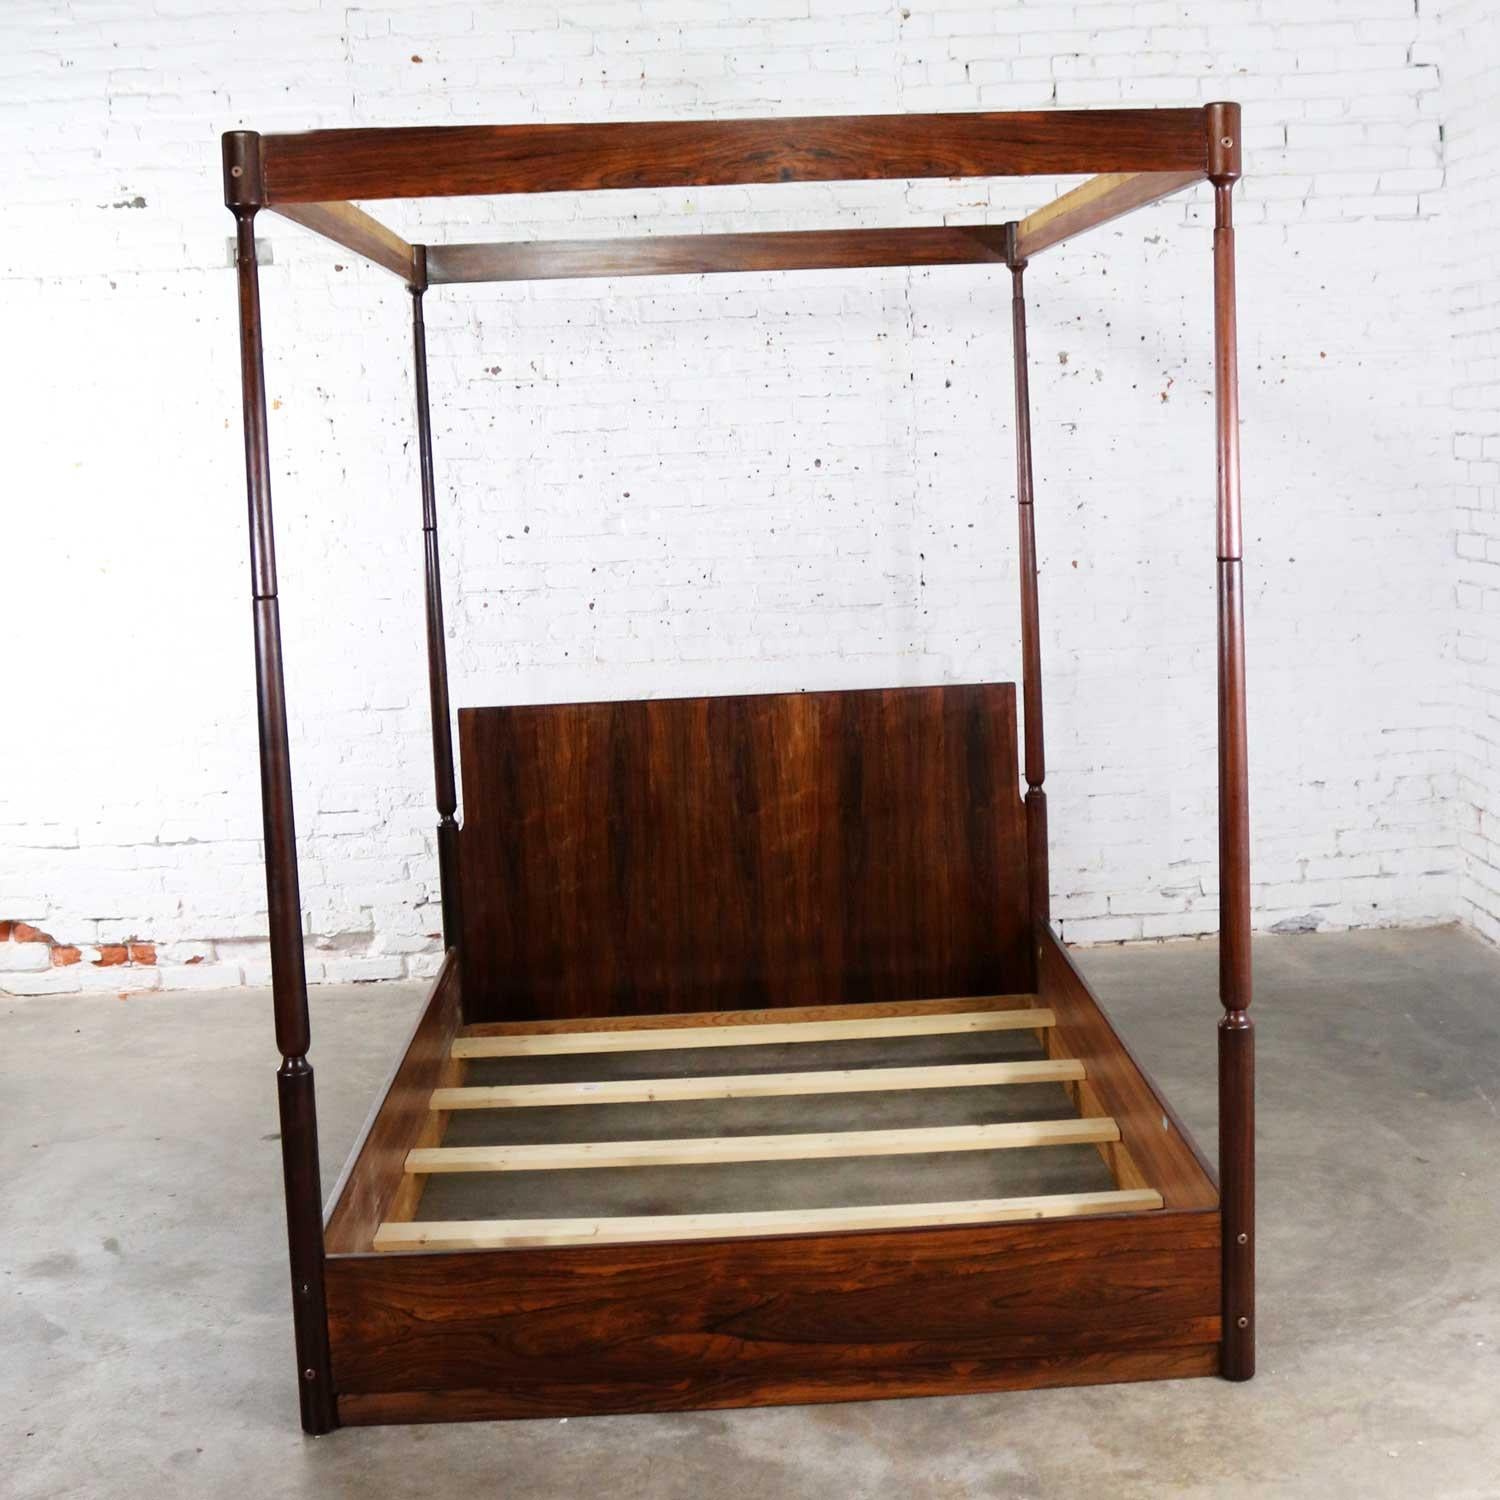 Handsome rosewood Scandinavian Mid-Century Modern full-size canopy bed designed by Arne Hovmand-Olsen for his studio Design Arne Hovmand-Olsen. This bed is in wonderful vintage condition with the normal wear you would see for its age and use, circa